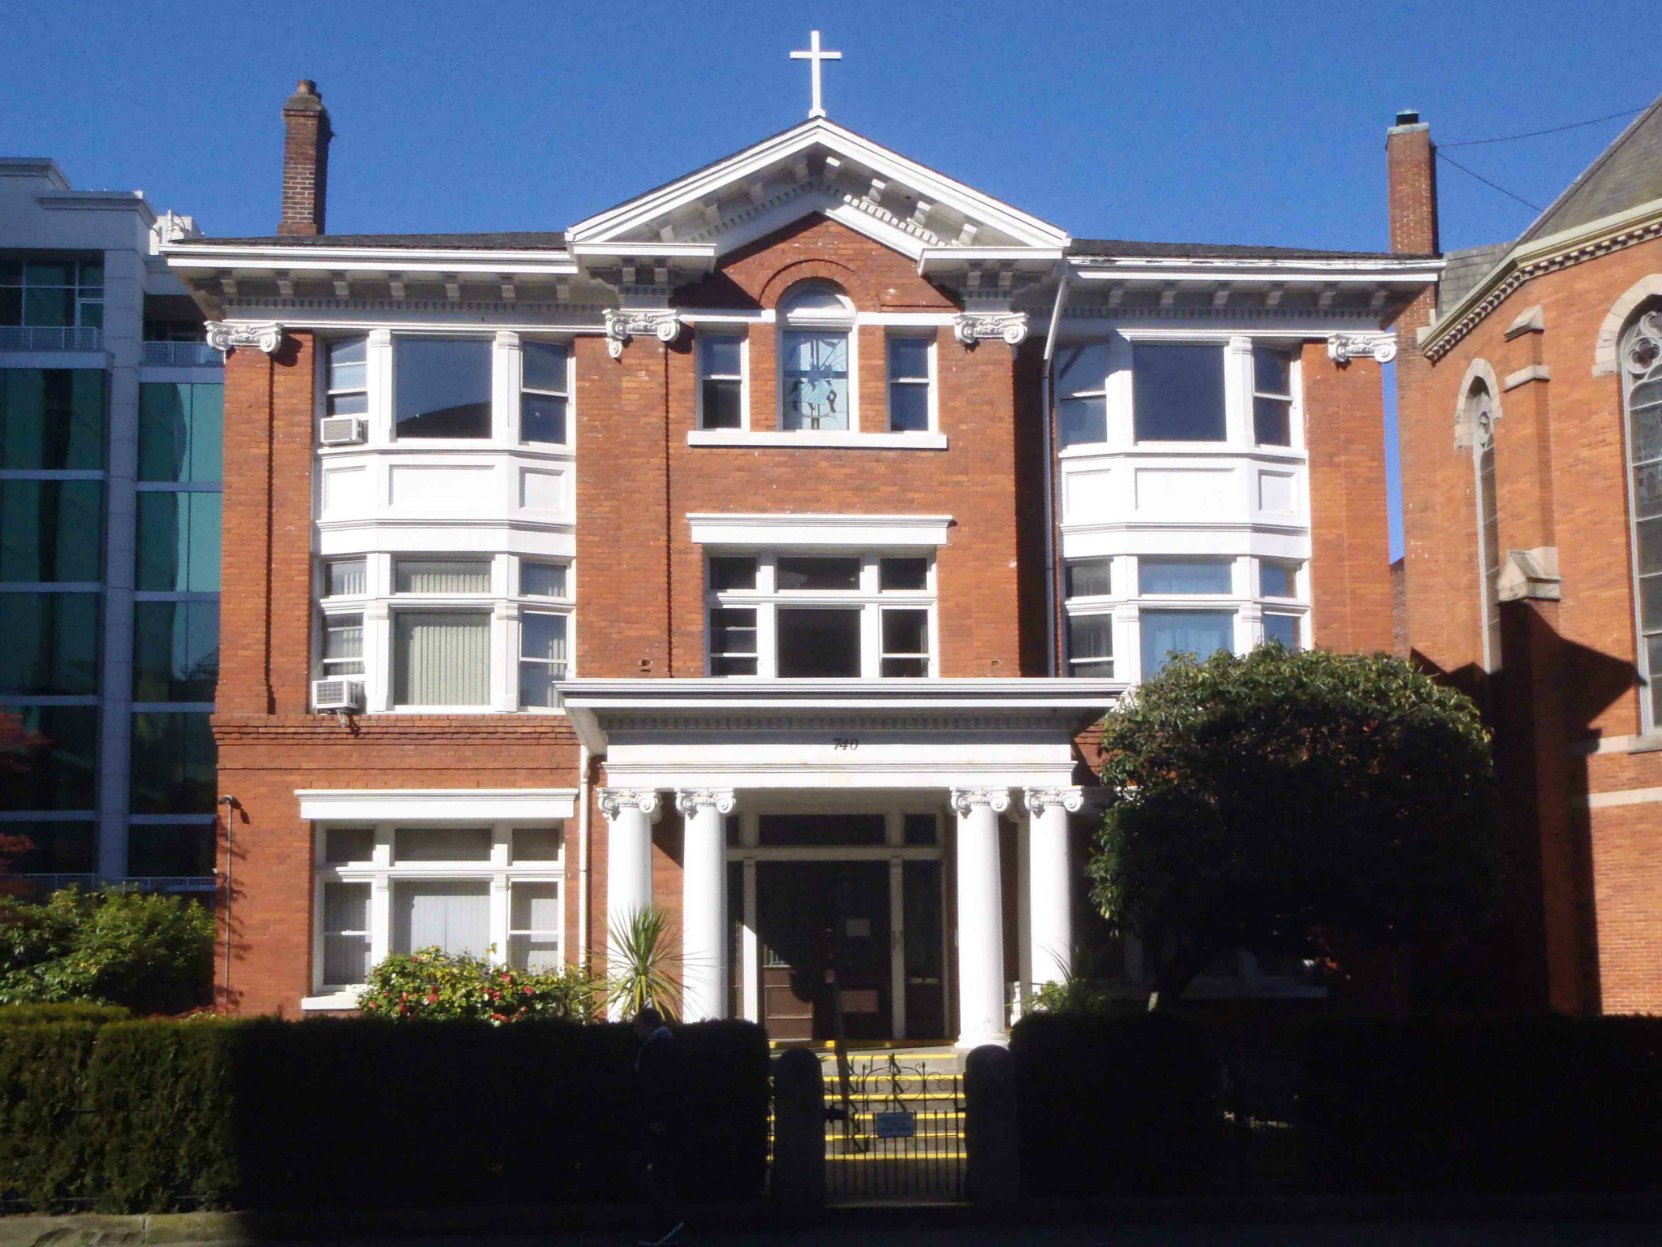 The Roman Catholic Bishop's Residence, 740 View Street, built in 1907 by architects Thomas Hooper and C. Elwood Watkins